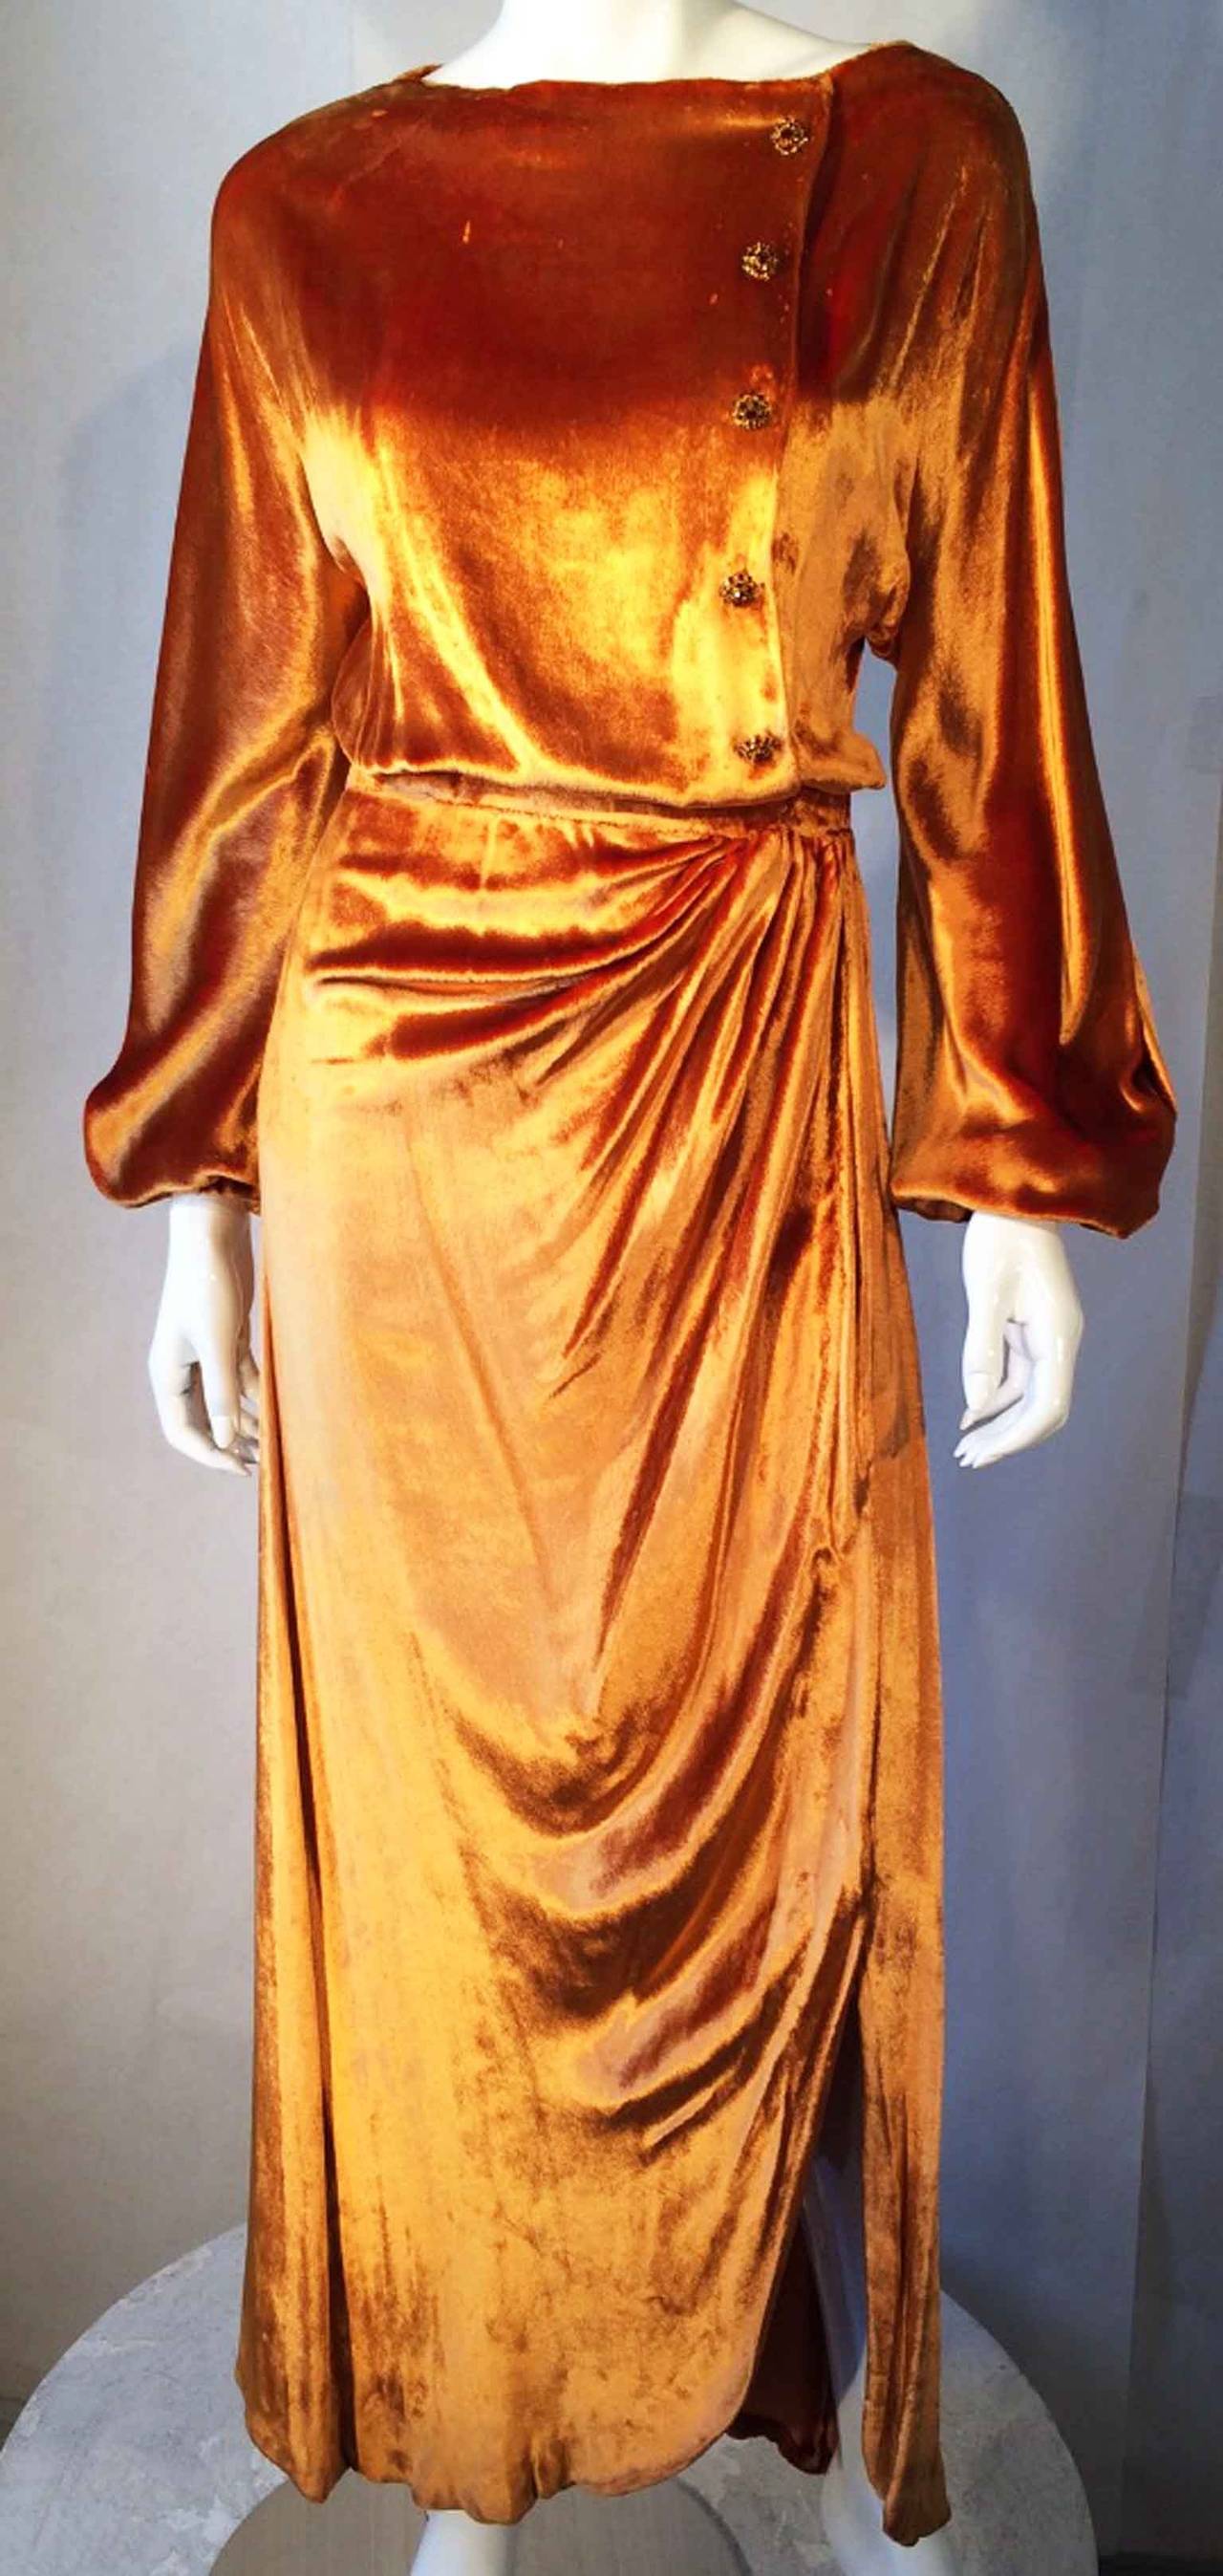 A fantastic and rare vintage Jean Patou haute couture gown. Authentic hand numbered item constructed of vivid golden panne velvet. Bias cut fabric item hand finished and features hidden snap and hook closure front. Item retains original paste set